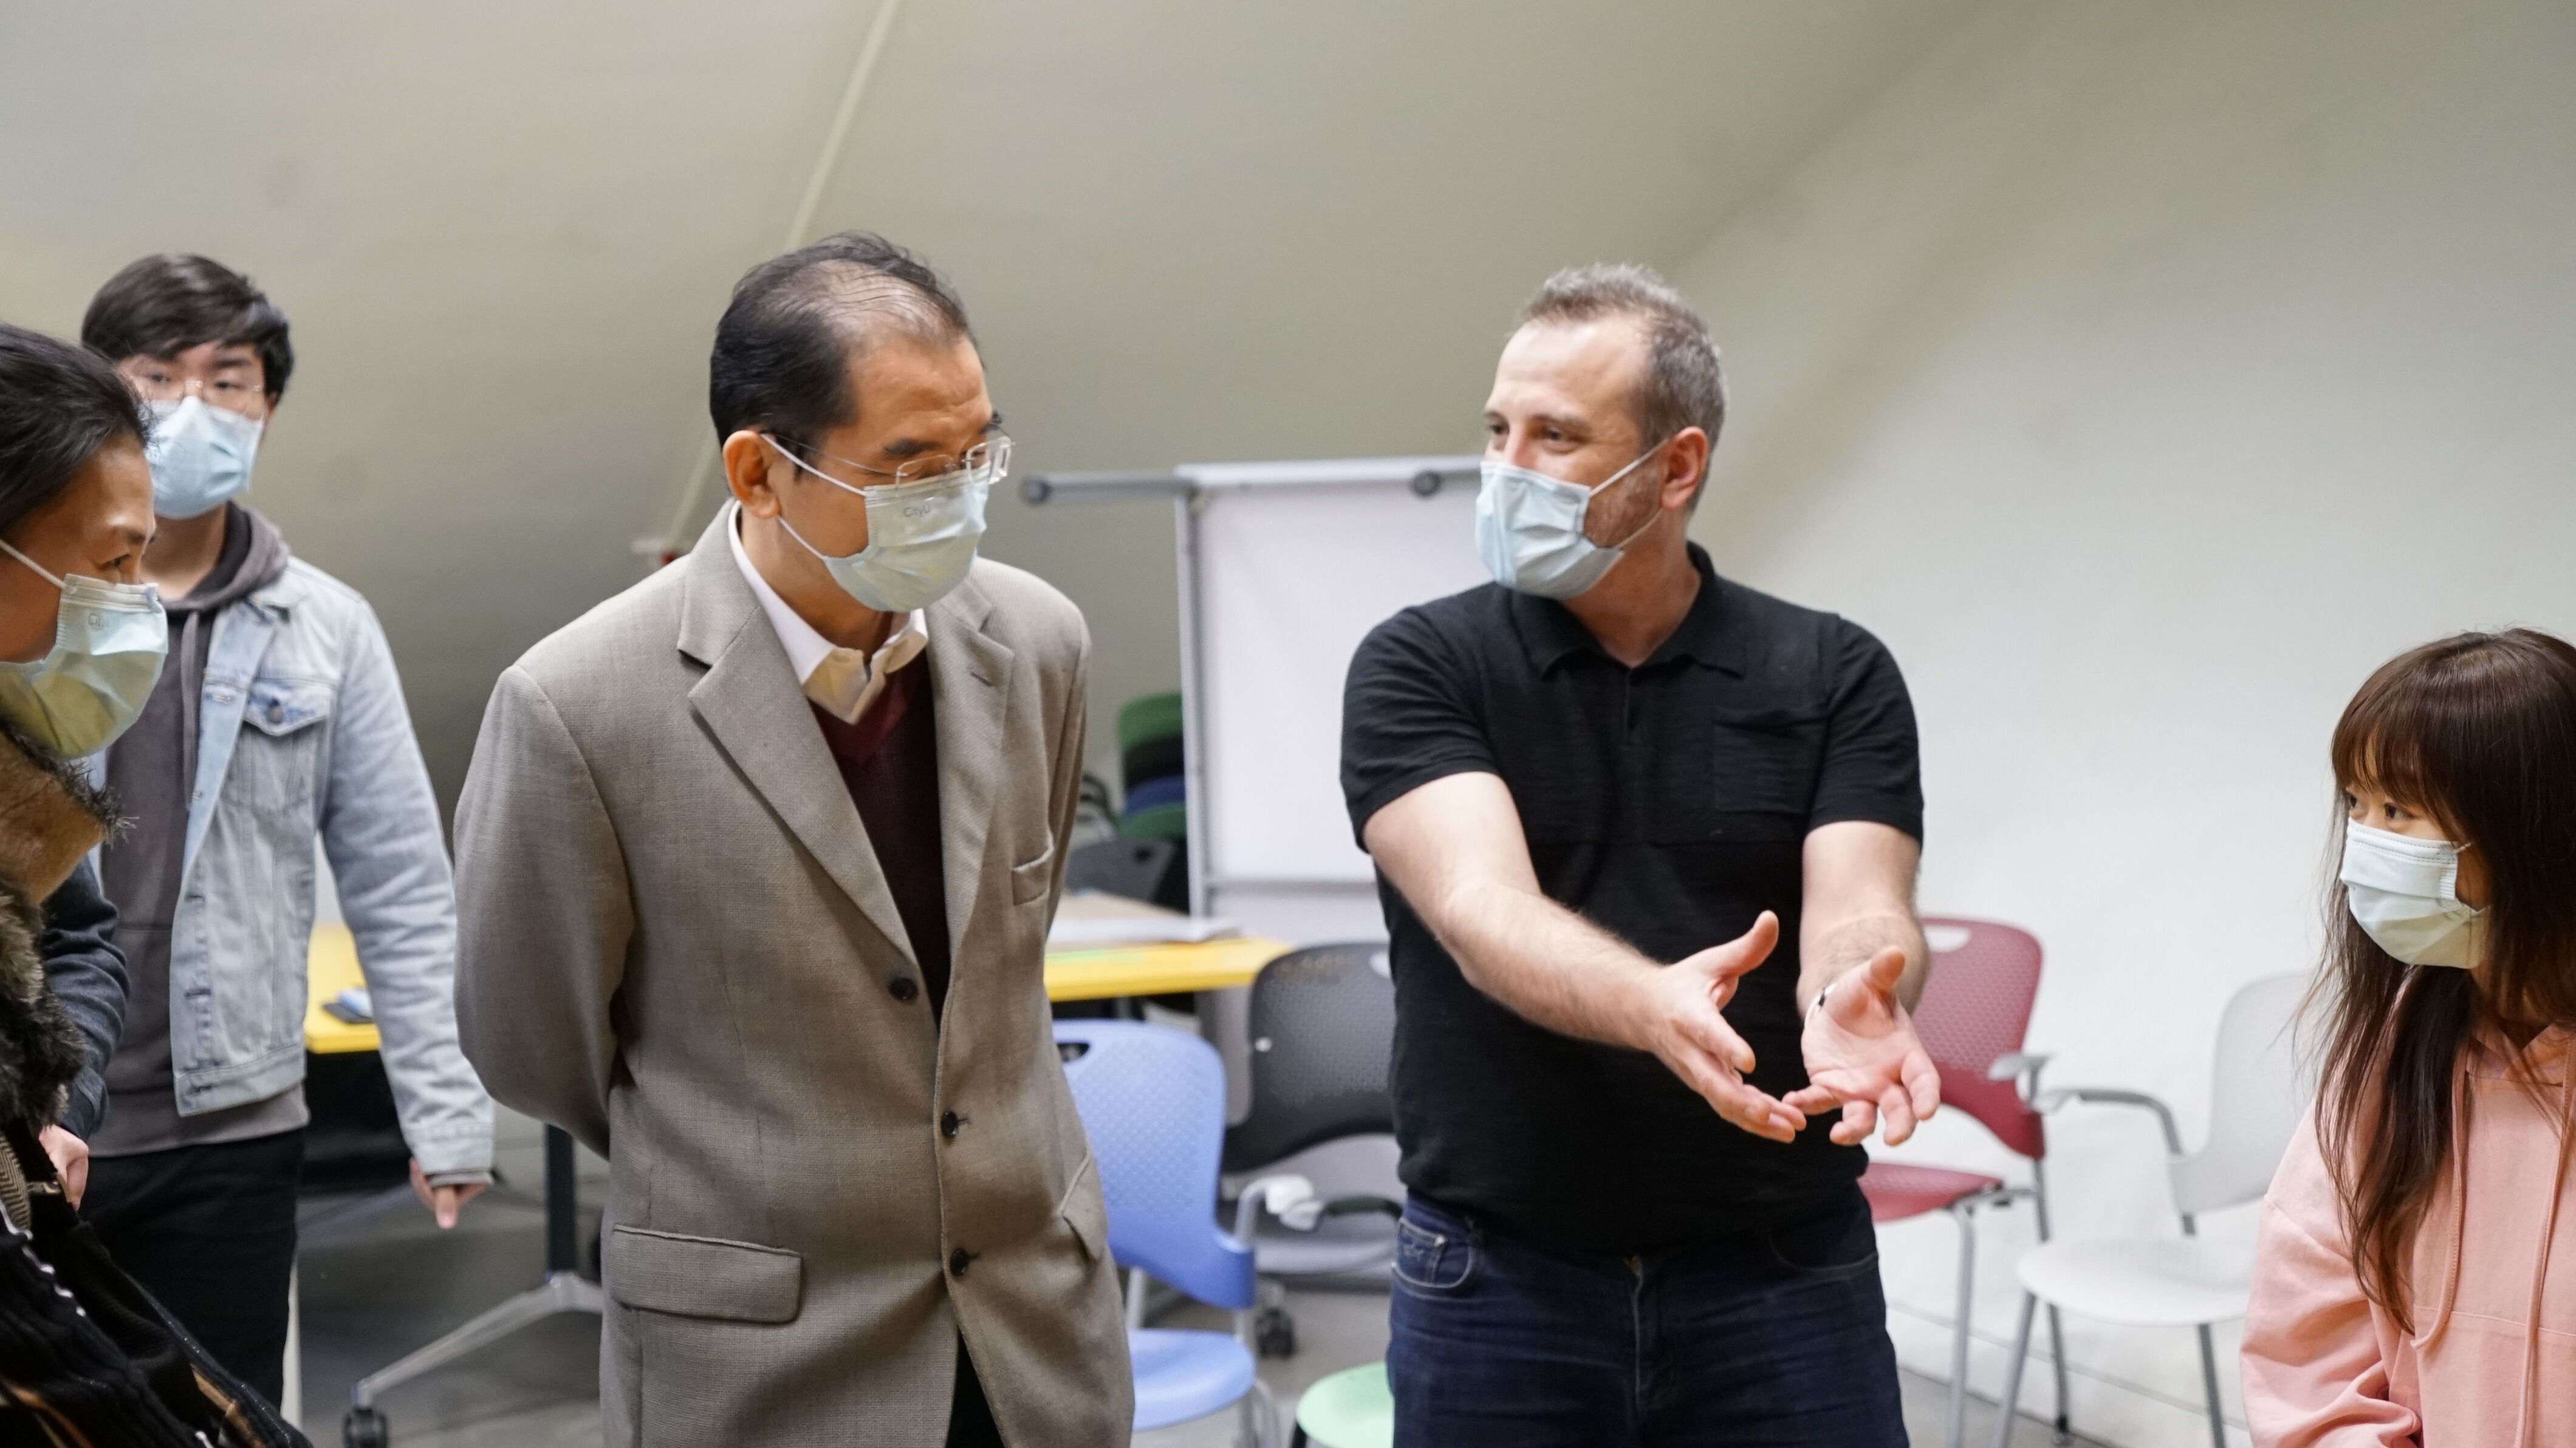 Dr. Alvaro Cassinelli explains the details of demo Veterinary Healthcare Training with AR to Vice-President Prof. Mengsu Yang.